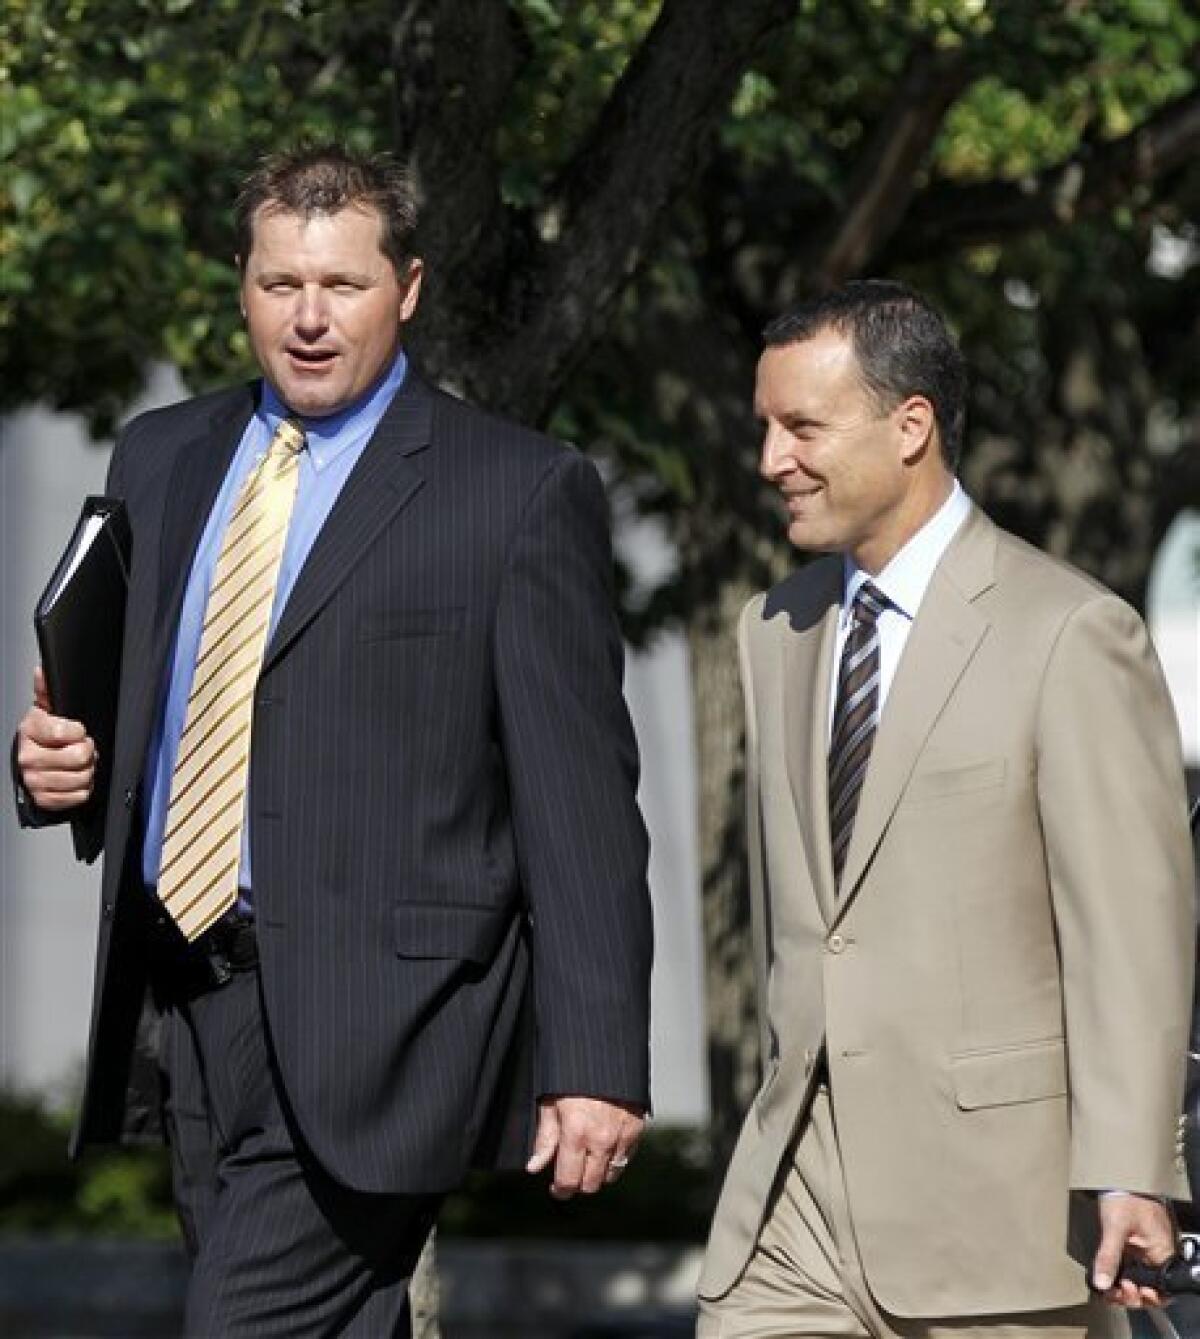 Man testifies he saw Clemens at Canseco pool party - Deseret News